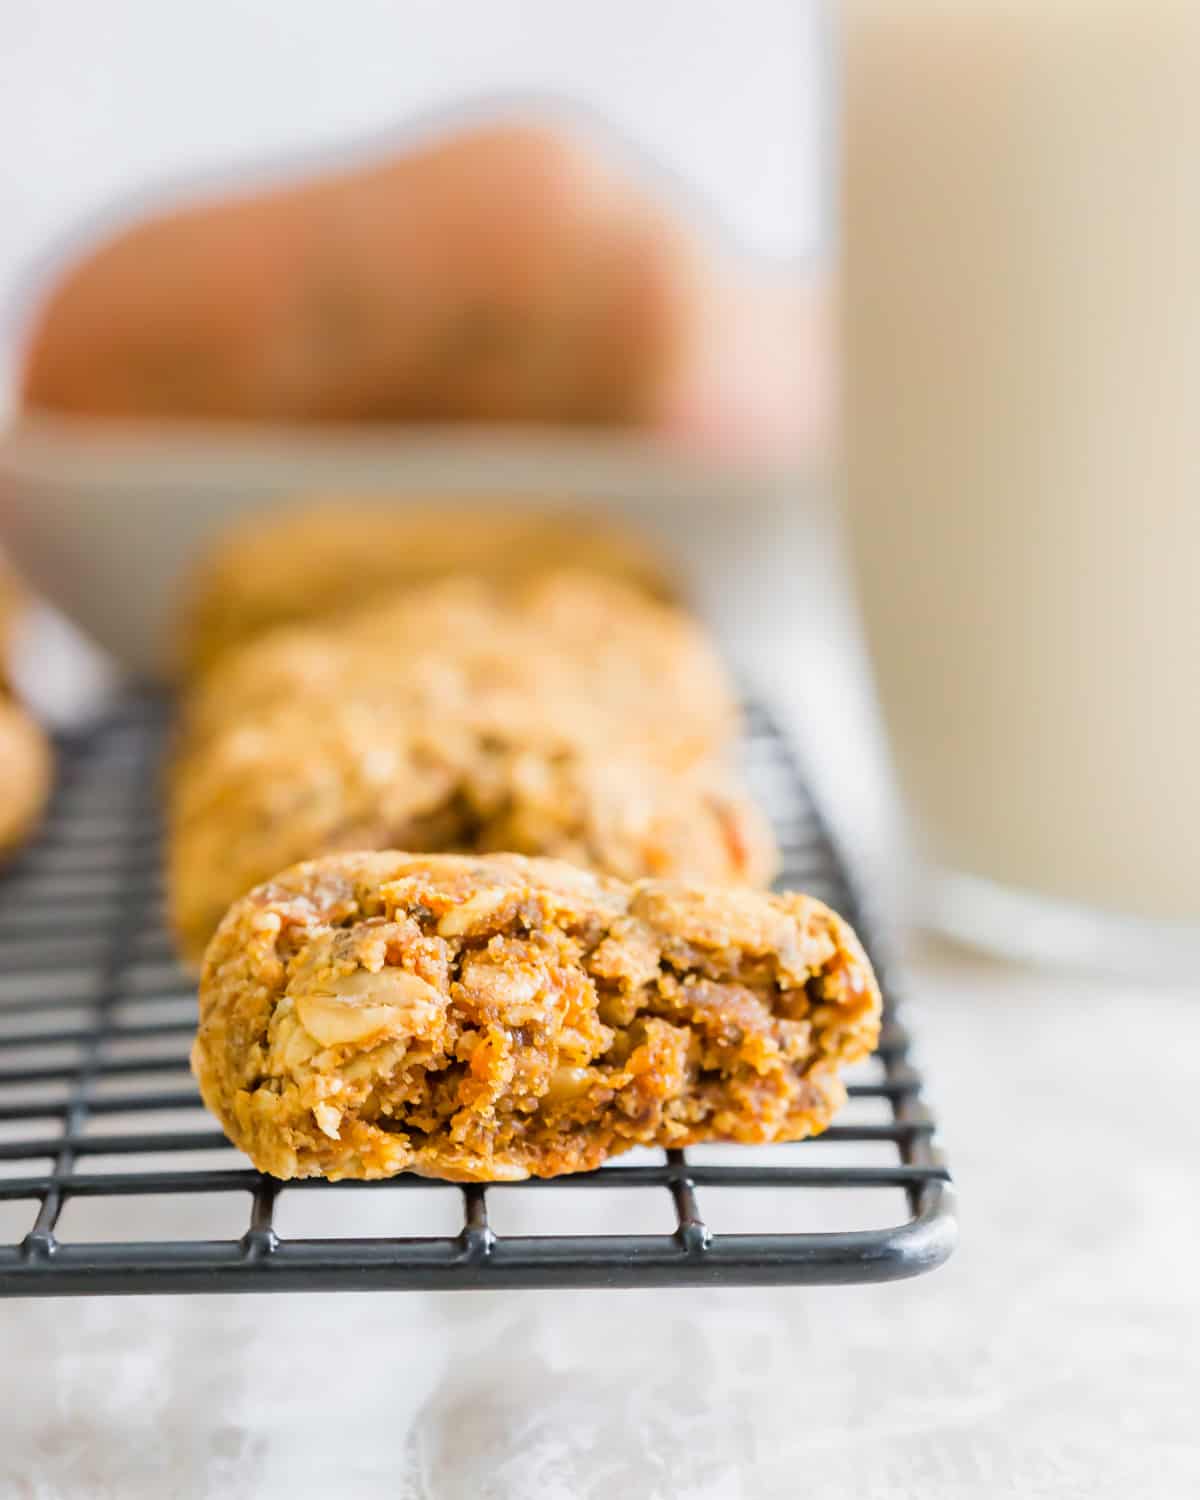 gluten-free and vegan sweet potato cookies made with rolled oats, almond flour and fall spices